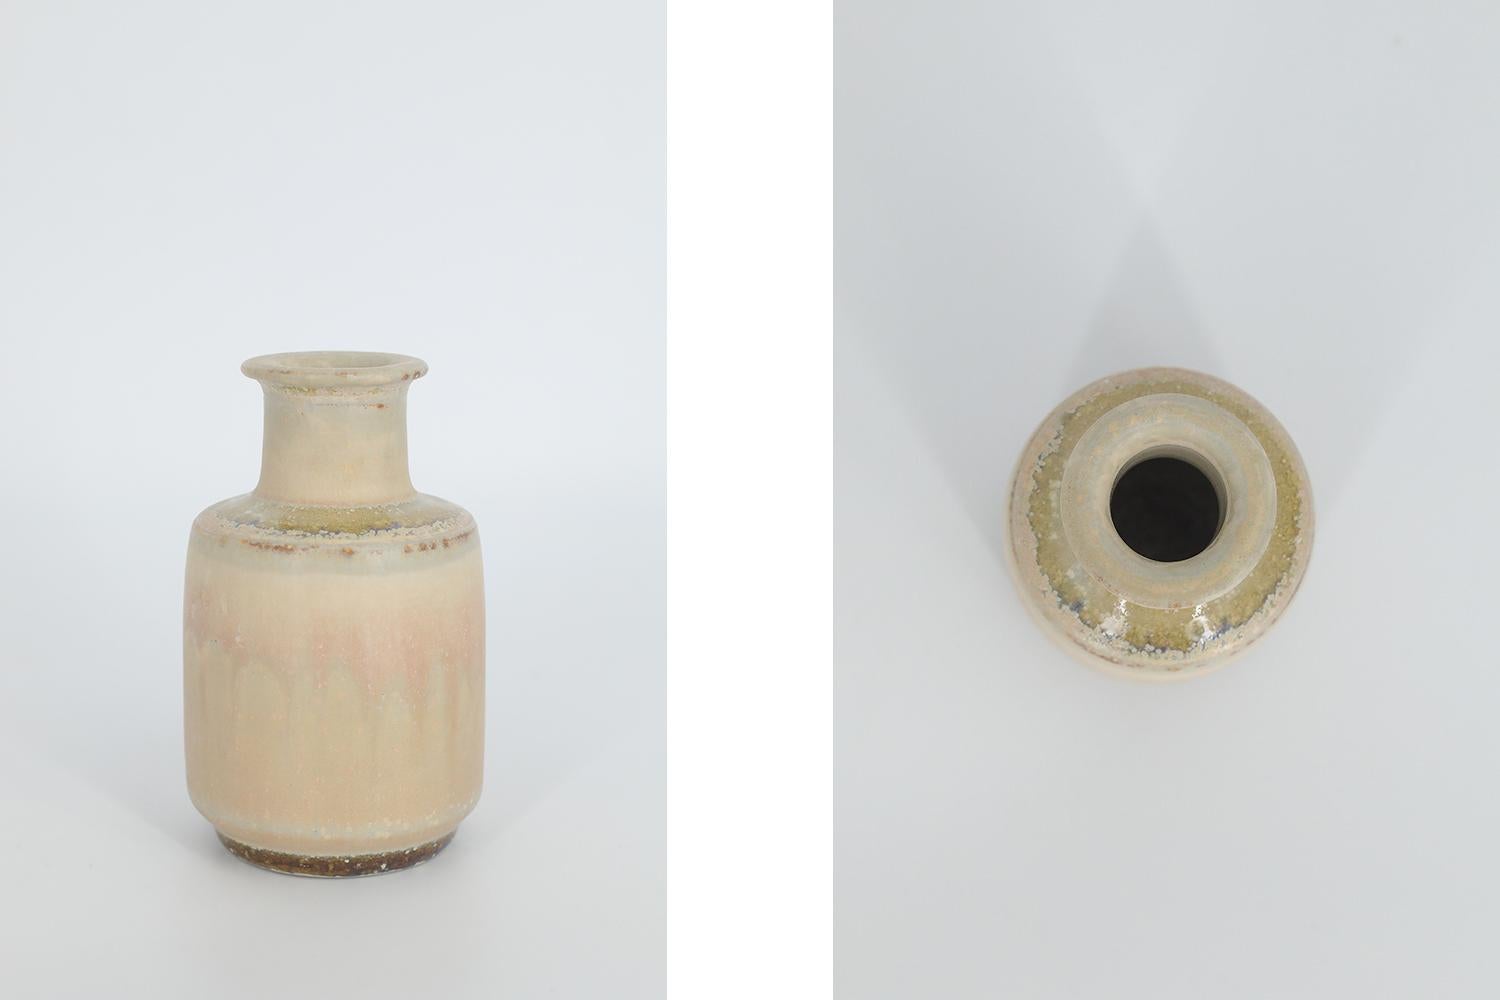 This miniature, collectible stoneware vase was designed by Gunnar Borg for the Swedish manufacture Höganäs Keramik during the 1960s. Handmade by a Master, with the utmost care and attention to details. The sand-colored vase in an irregular shade.